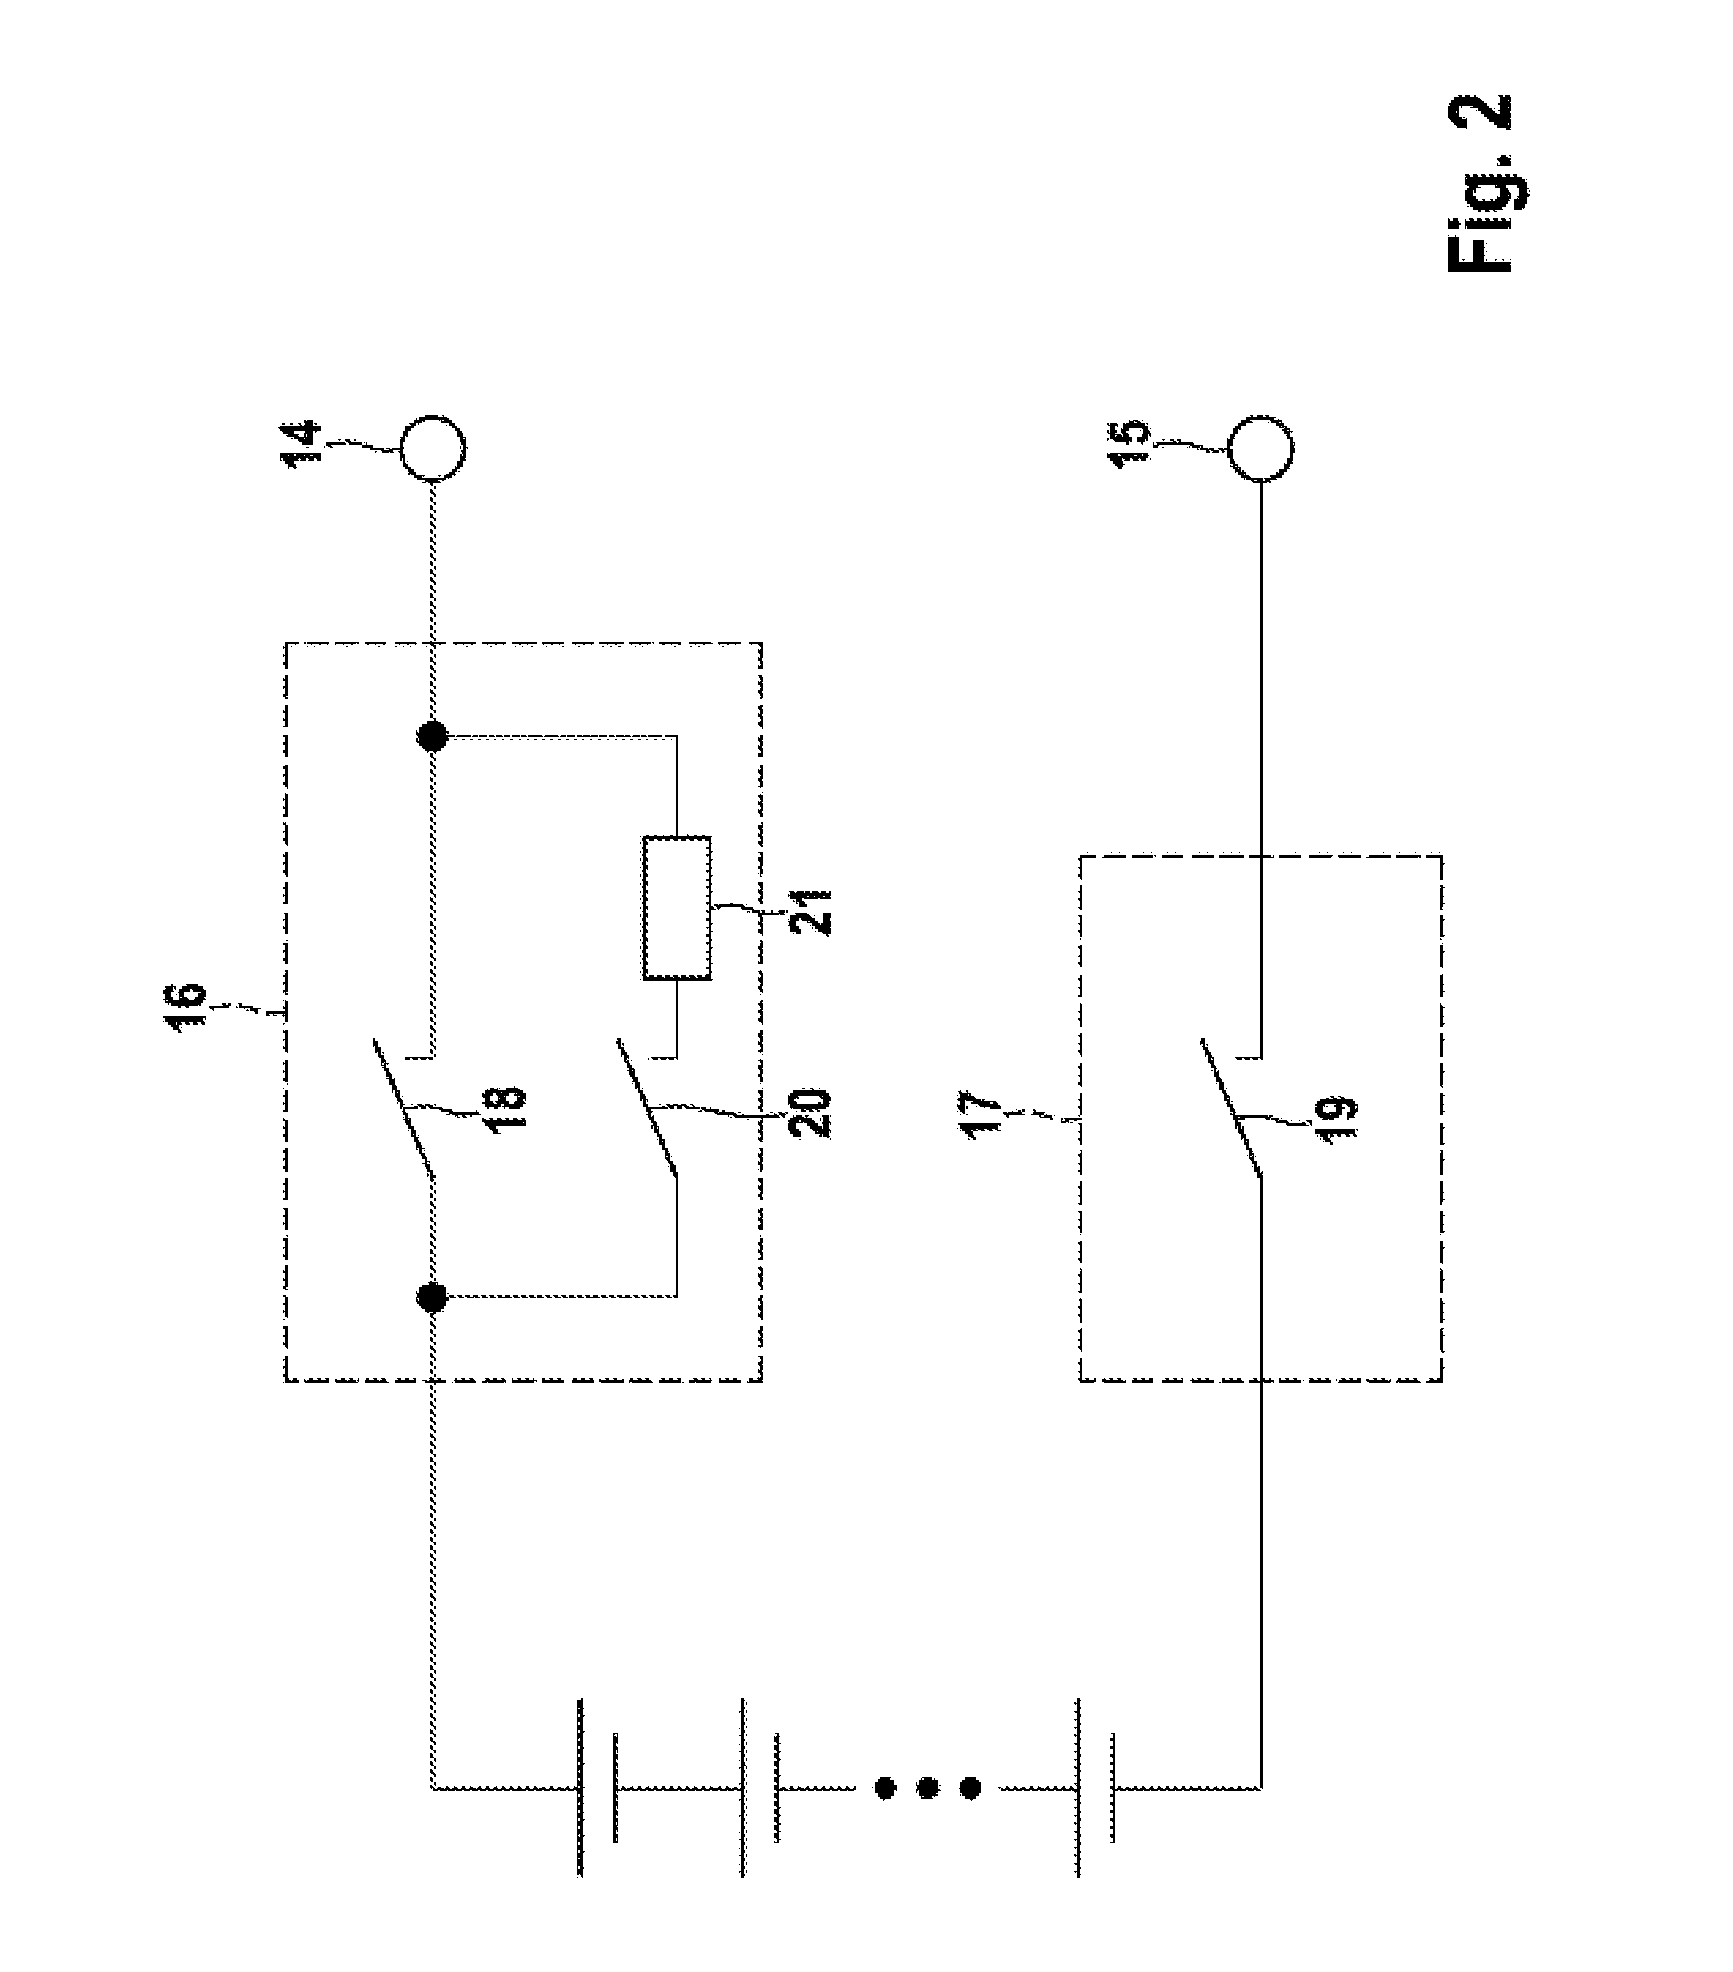 Coupling Unit and Battery Module having an Integrated Pulse-Controlled Inverter and Increased Reliability